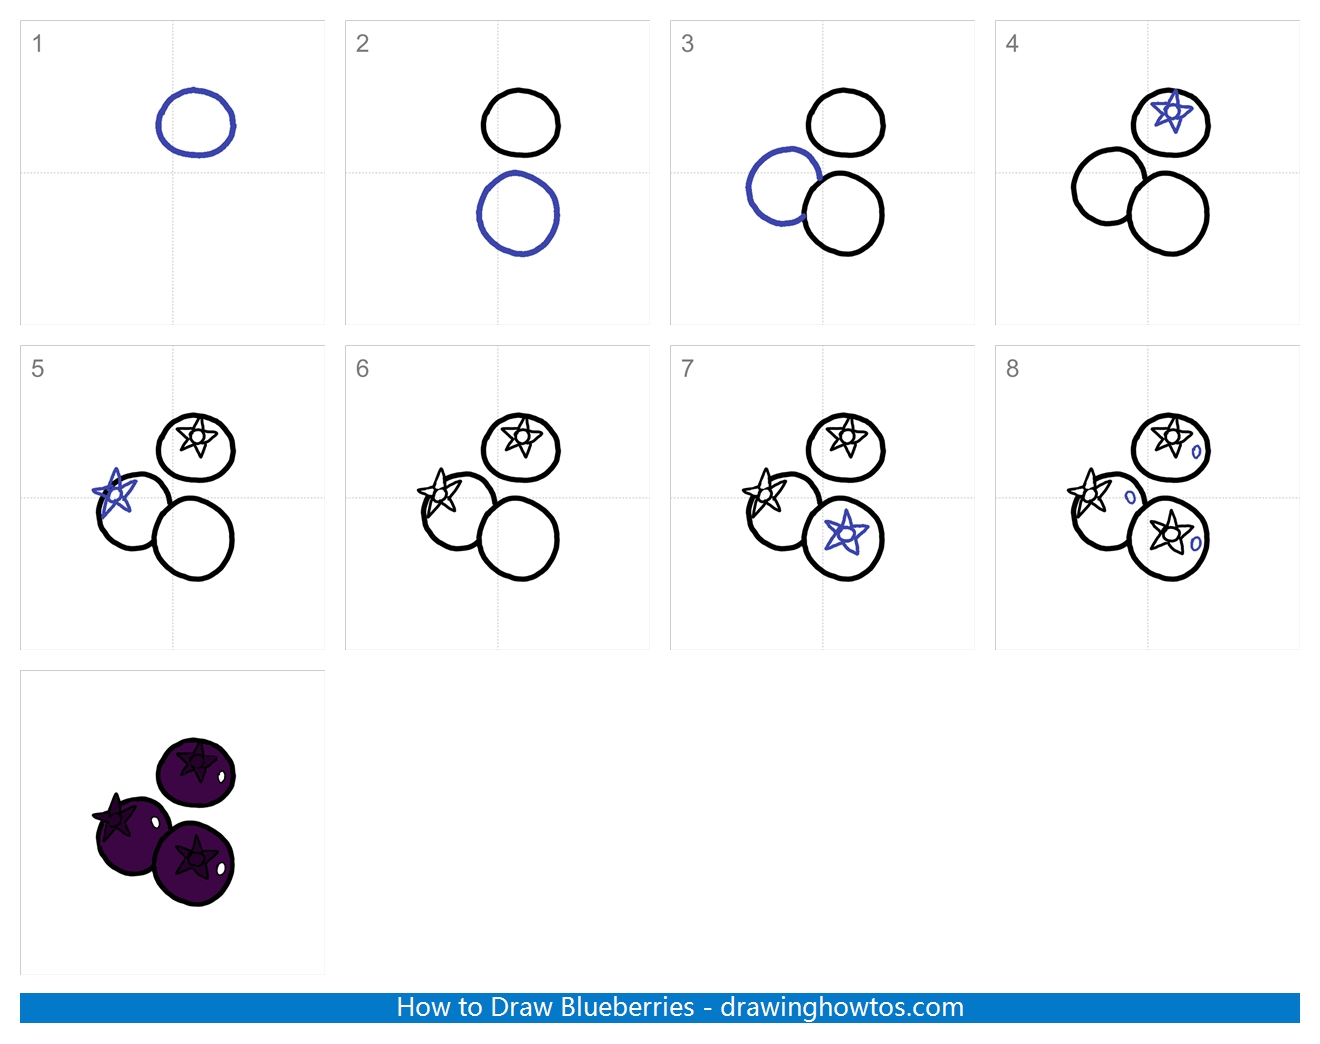 How to Draw Blueberries Step by Step